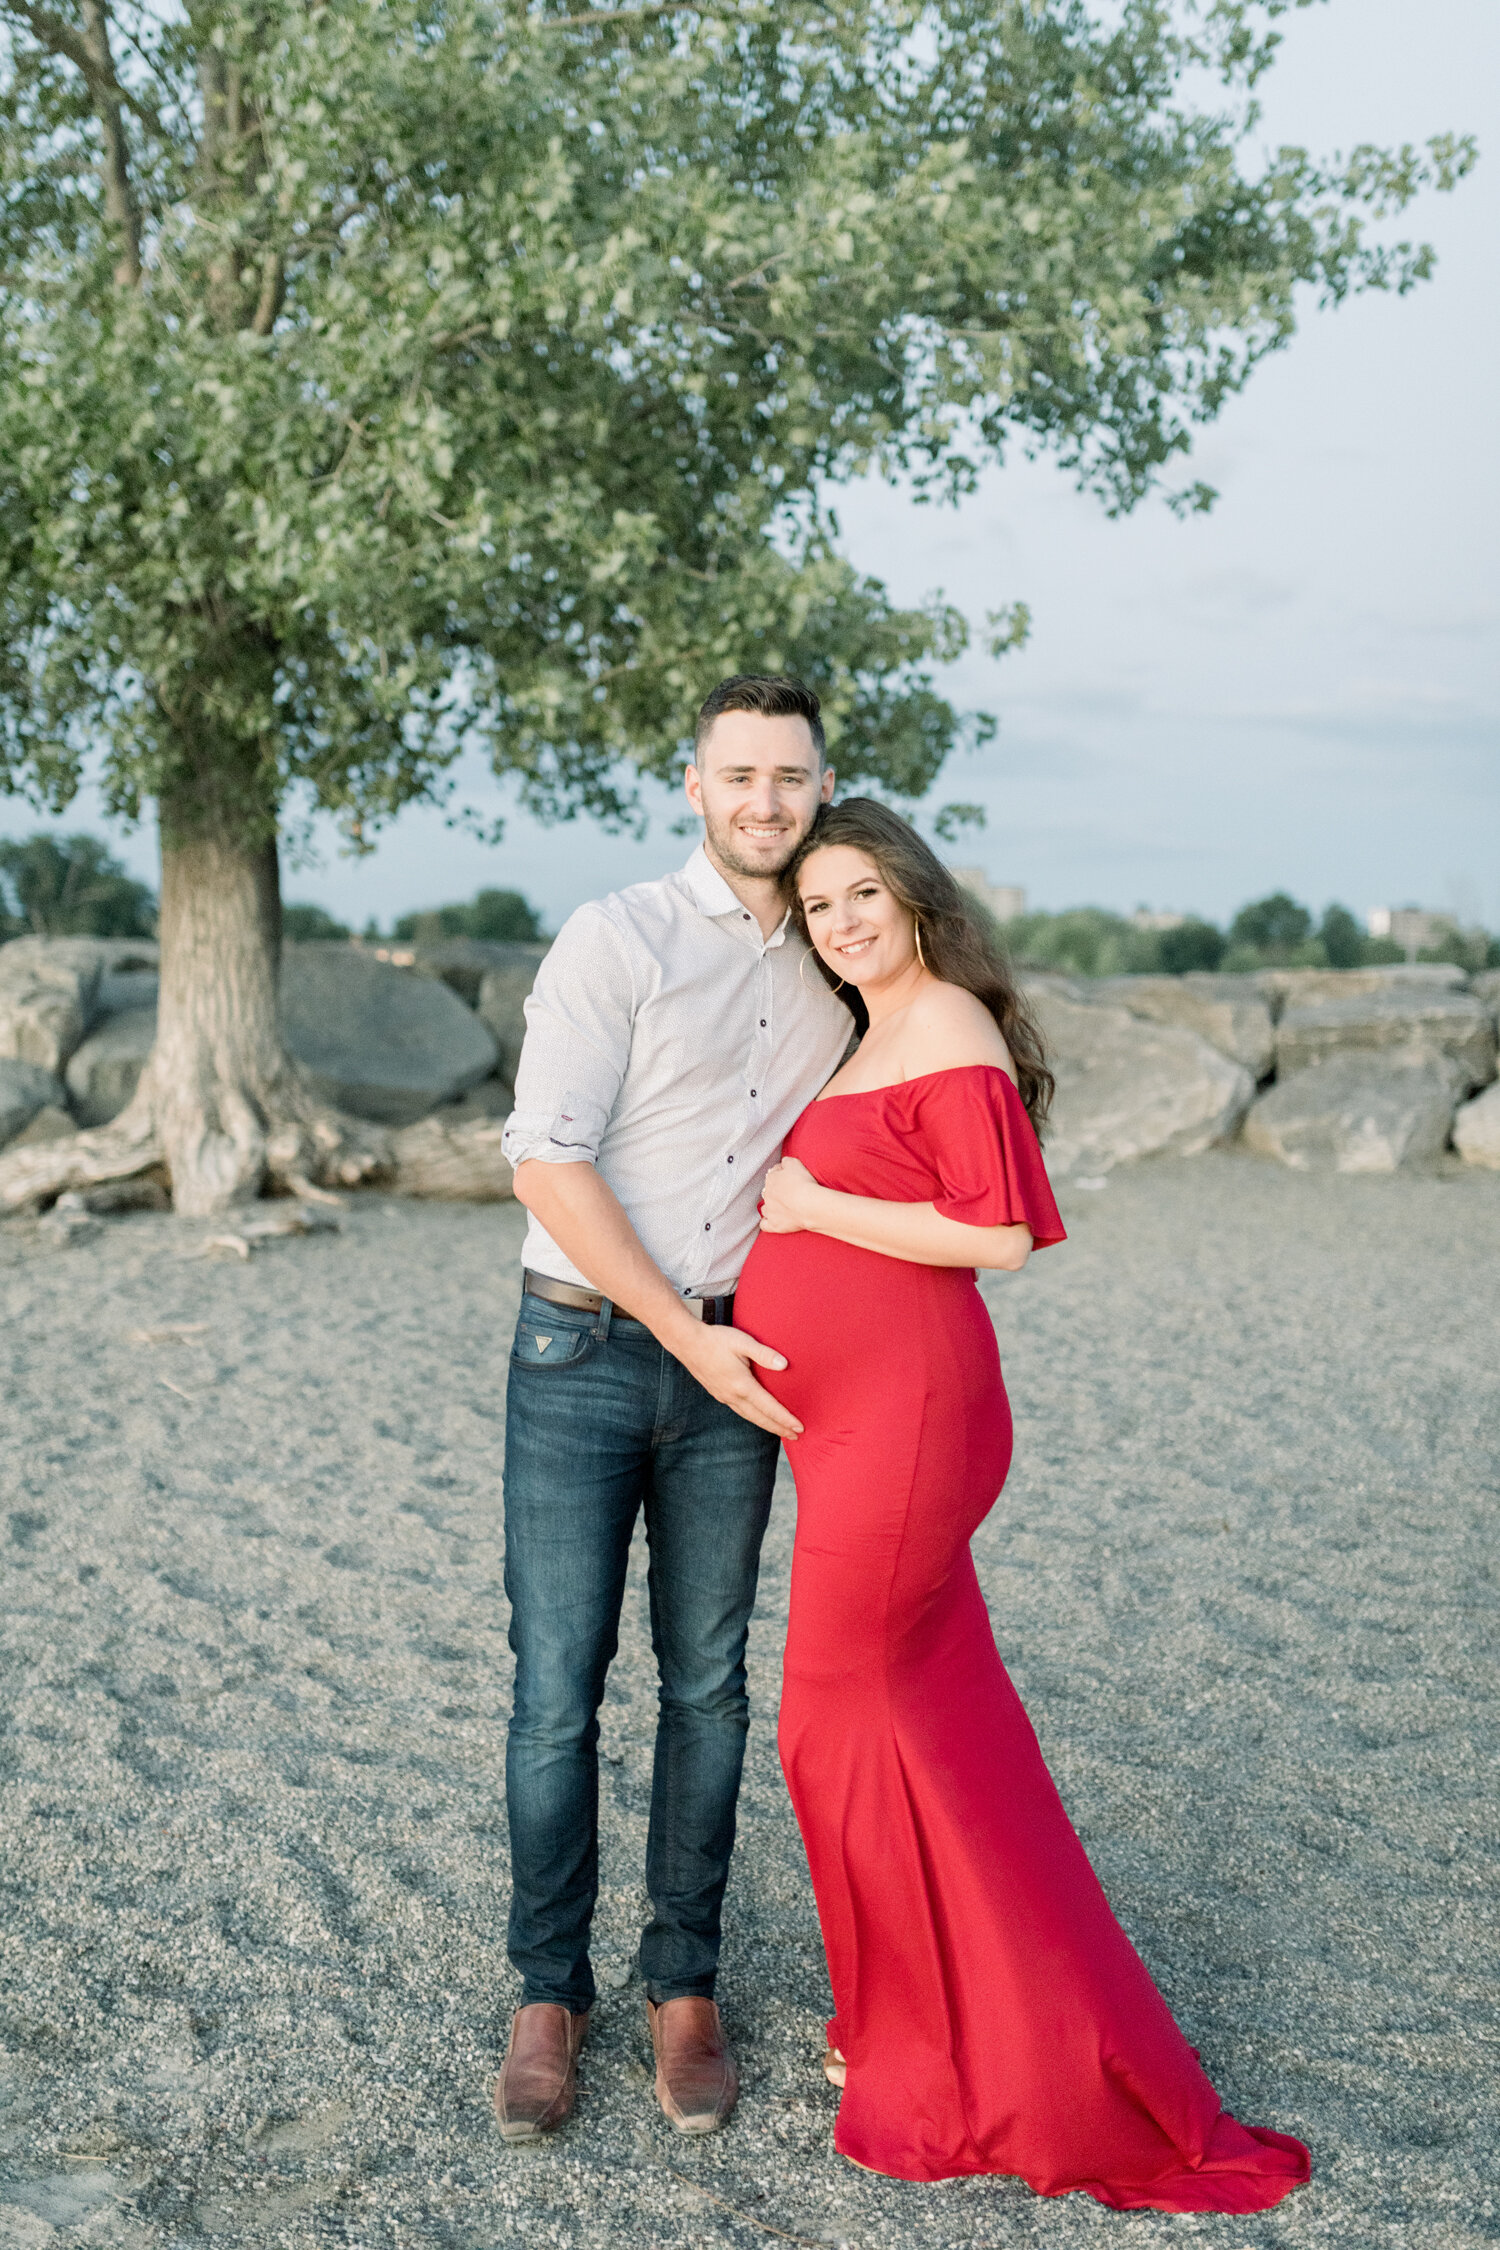  With boulders and shade trees in the backdrop, this expectant couple poses during their maternity session with Chelsea Mason Photography along the sandy Brittania Beach in Ontario, Canada. ontario canada maternity photos, womens maternity fitted off